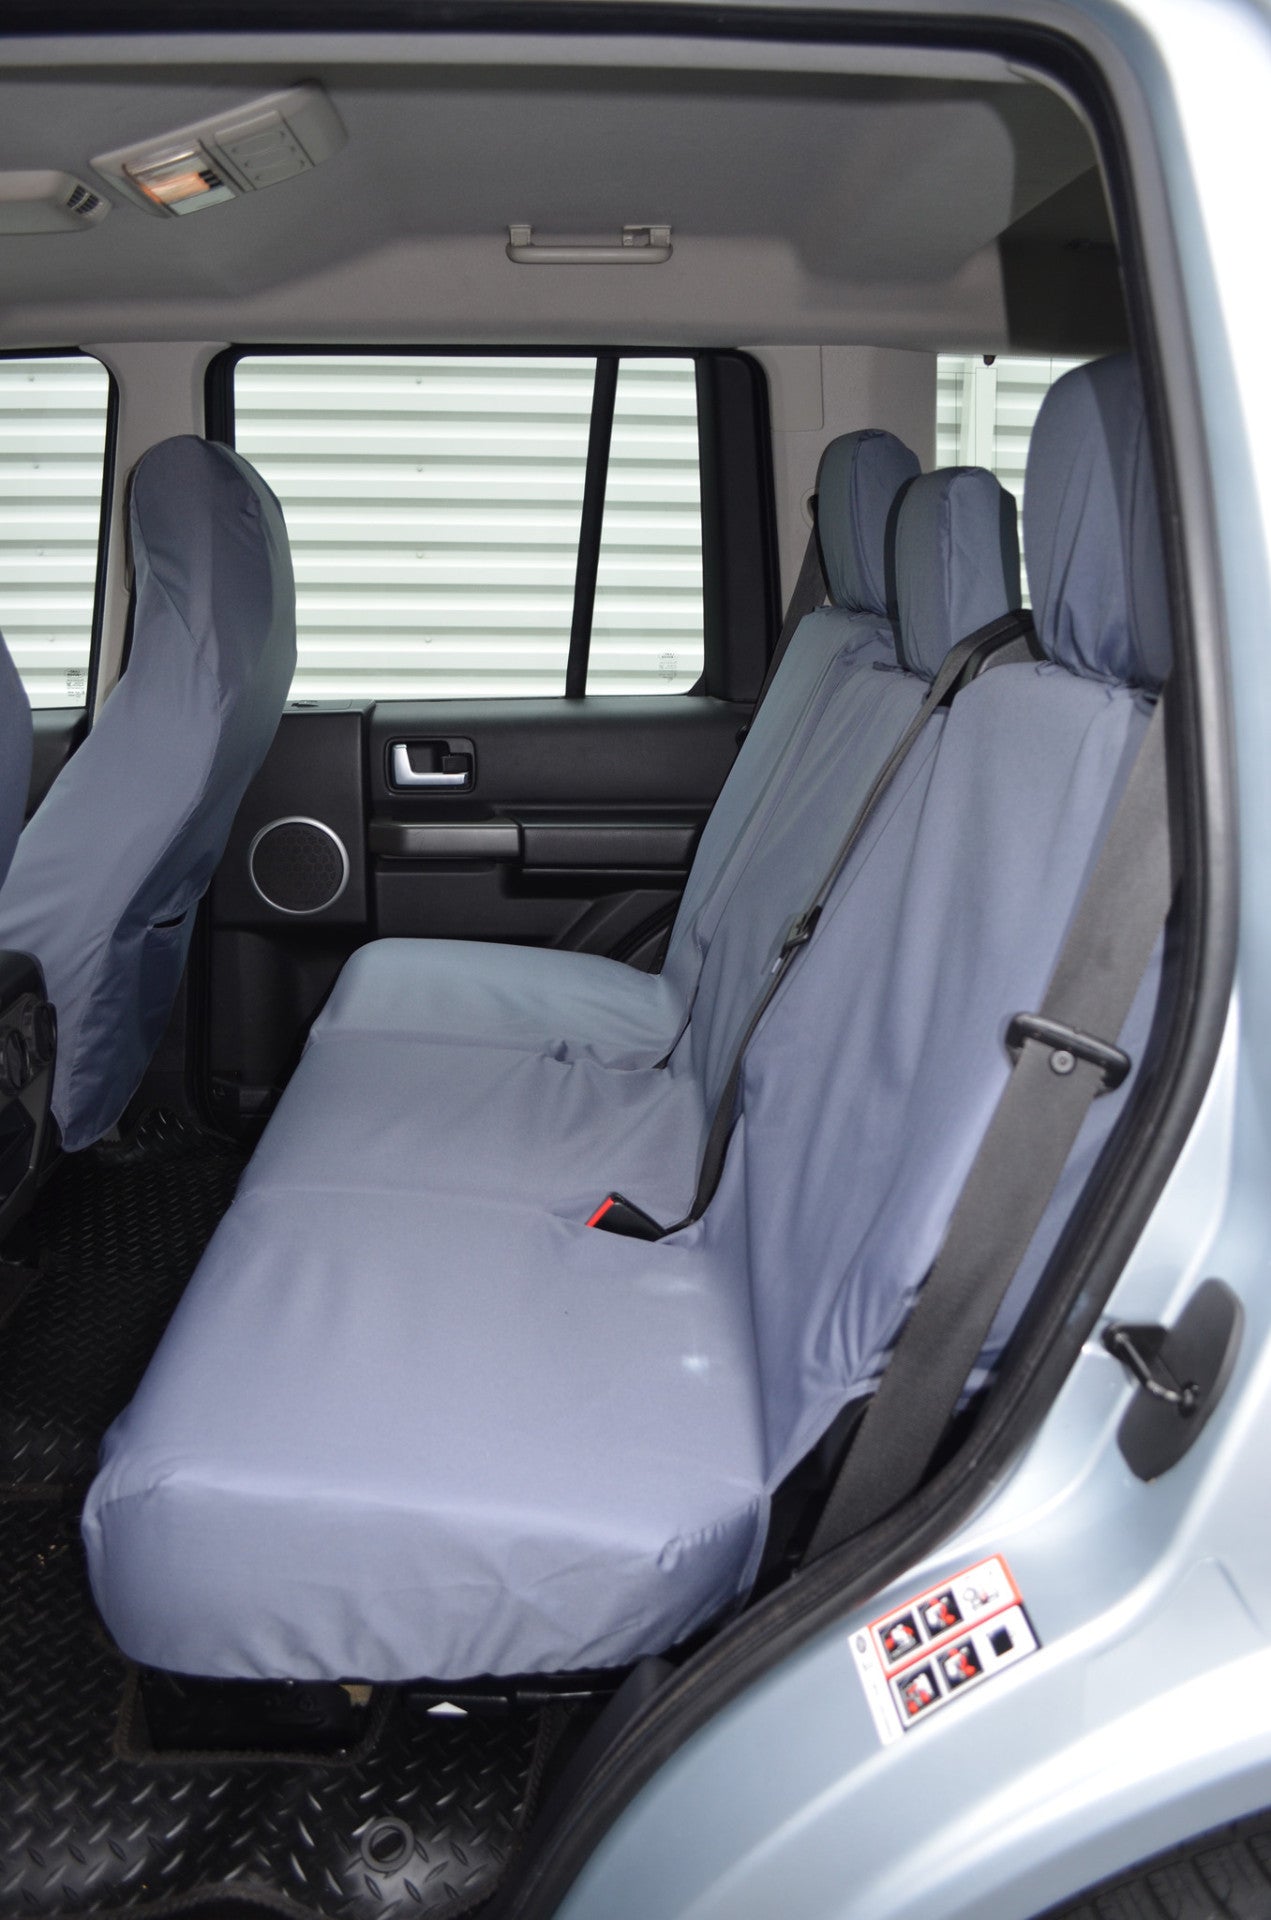 Land Rover Discovery 3 &amp; 4 (2004-2017) Seat Covers Rear 2nd Row (3 Singles) / Grey Scutes Ltd